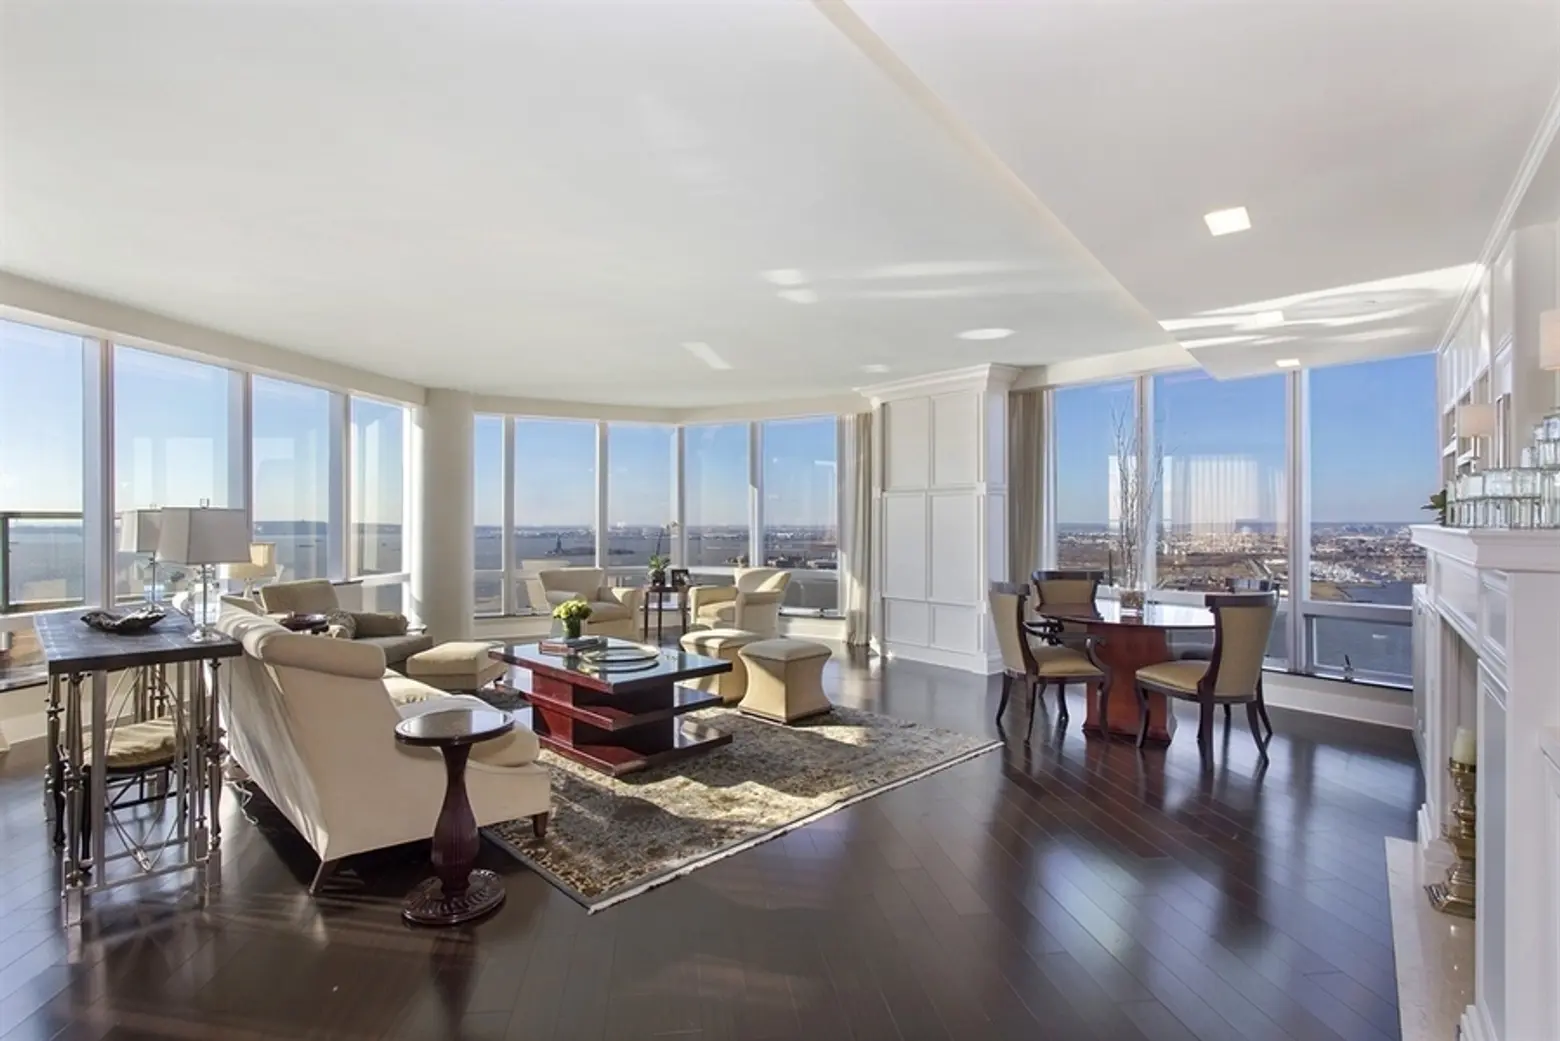 Combined Ritz-Carlton Condos Look to Set Record With $118.5 Million Asking Price